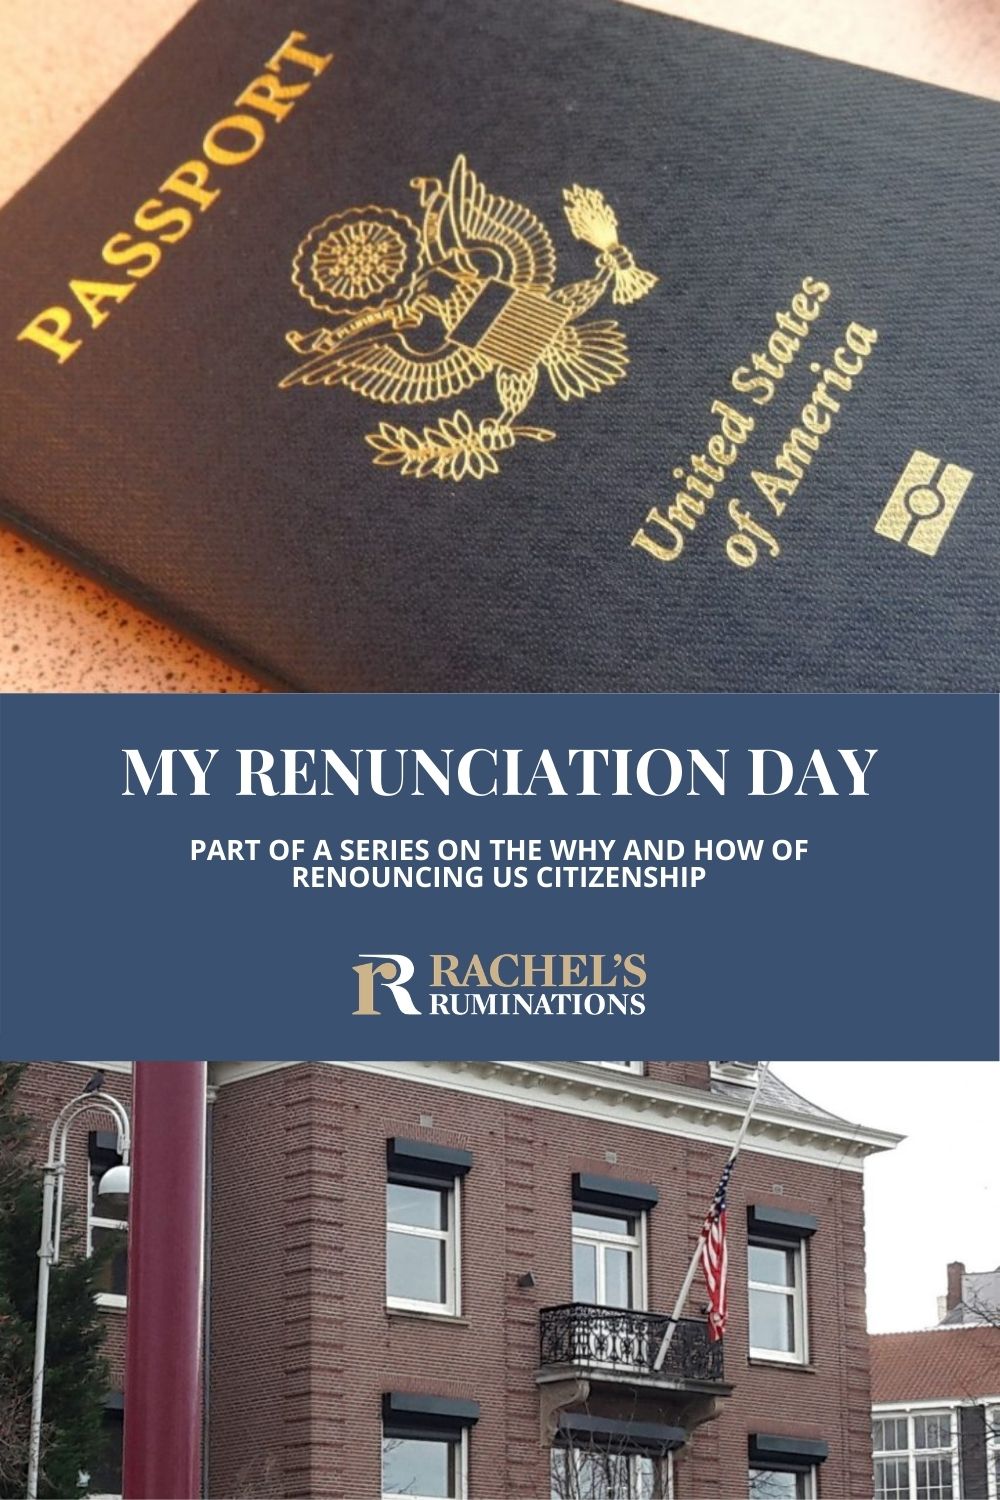 This article describes the day of my renunciation of US citizenship: just the blow-by-blow description of what happened at the US consulate. via @rachelsruminations